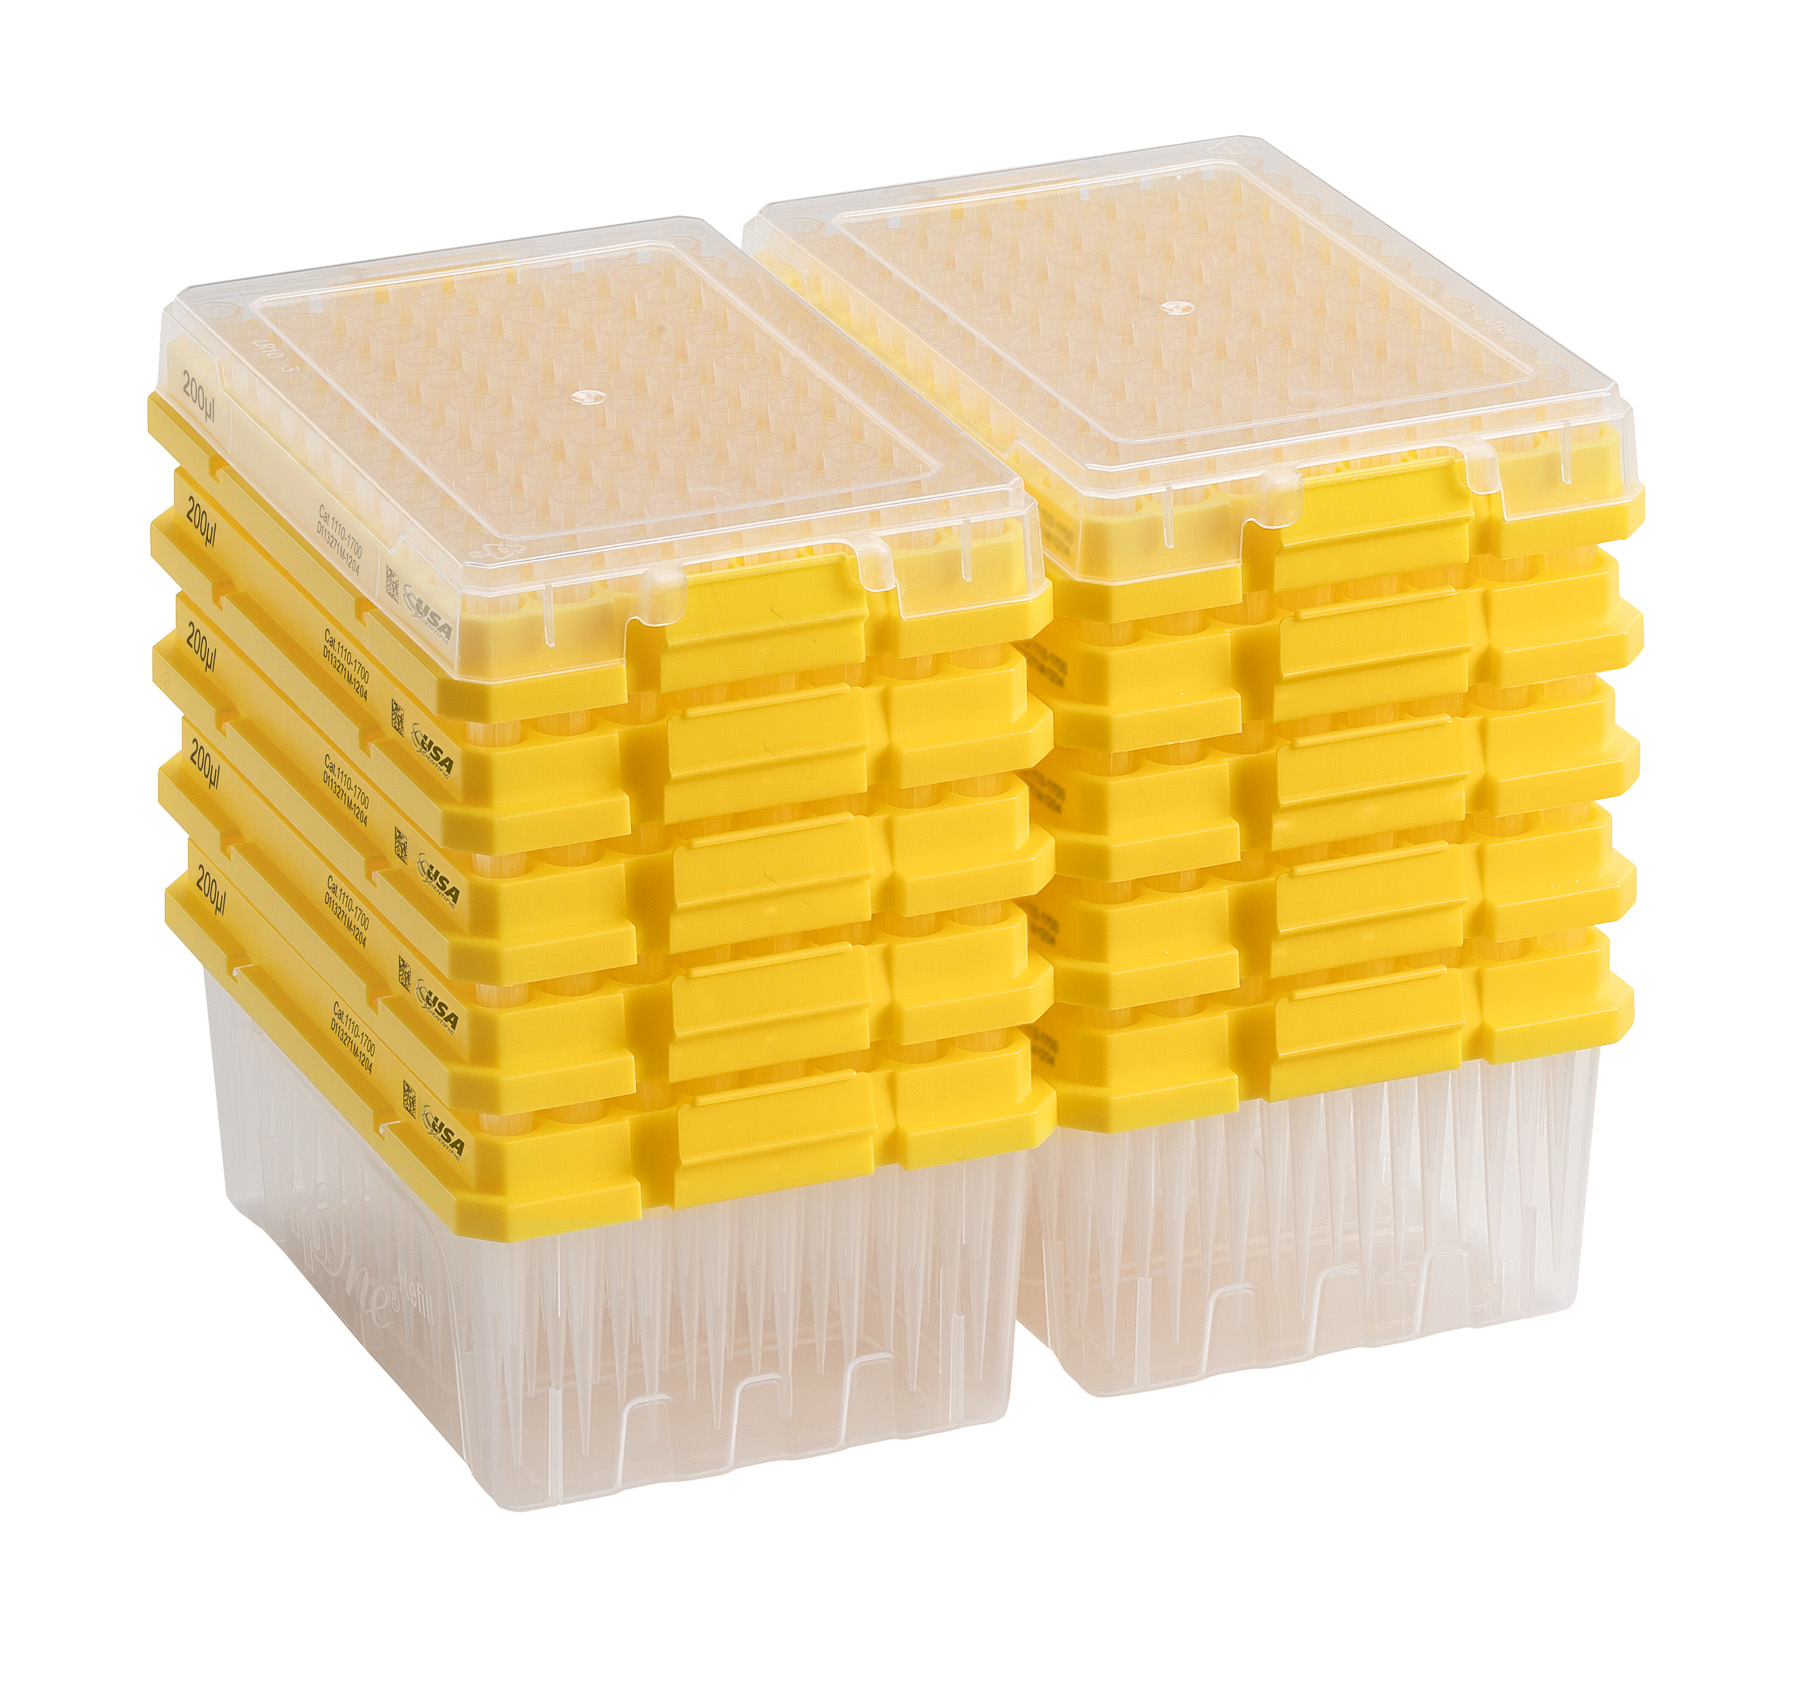 TipOne refill pack, yellow